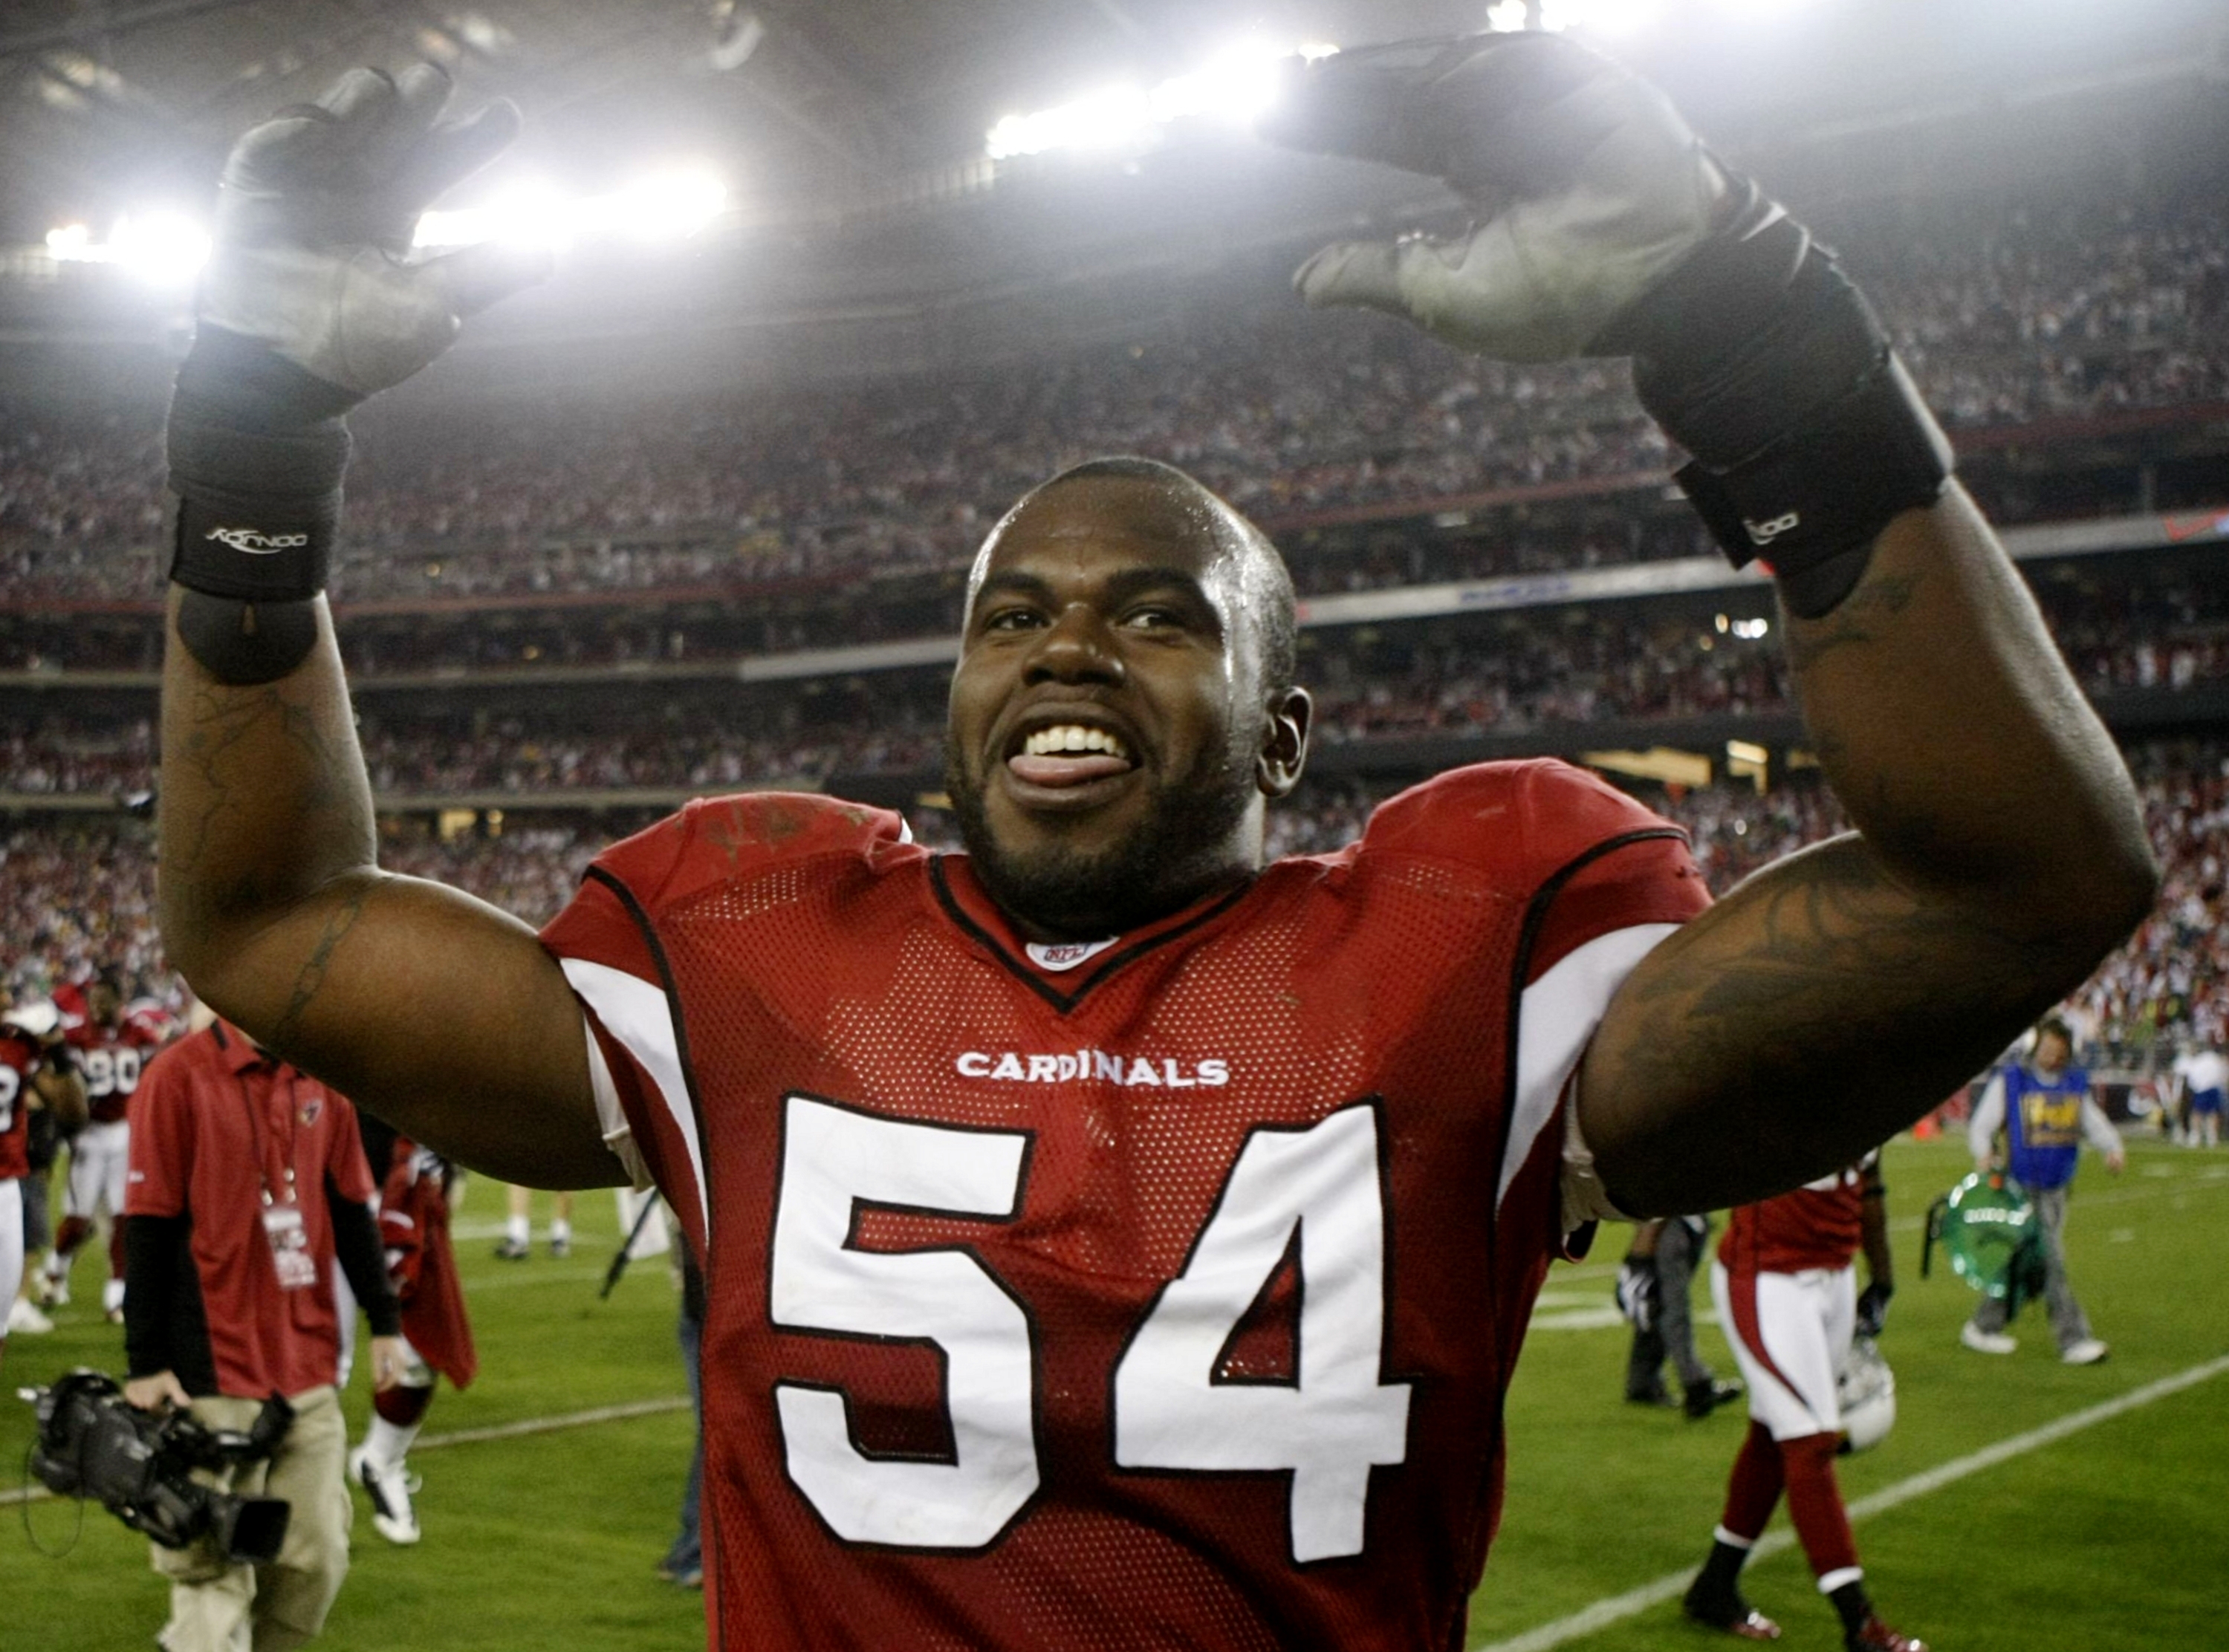 GLENDALE, AZ - JANUARY 10:  Linebacker Gerald Hayes #54 of the Arizona Cardinals walks off the field after defeating the Green Bay Packers 51-45 in the 2010 NFC wild-card playoff game at University of Phoenix Stadium on January 10, 2010 in Glendale, Arizo